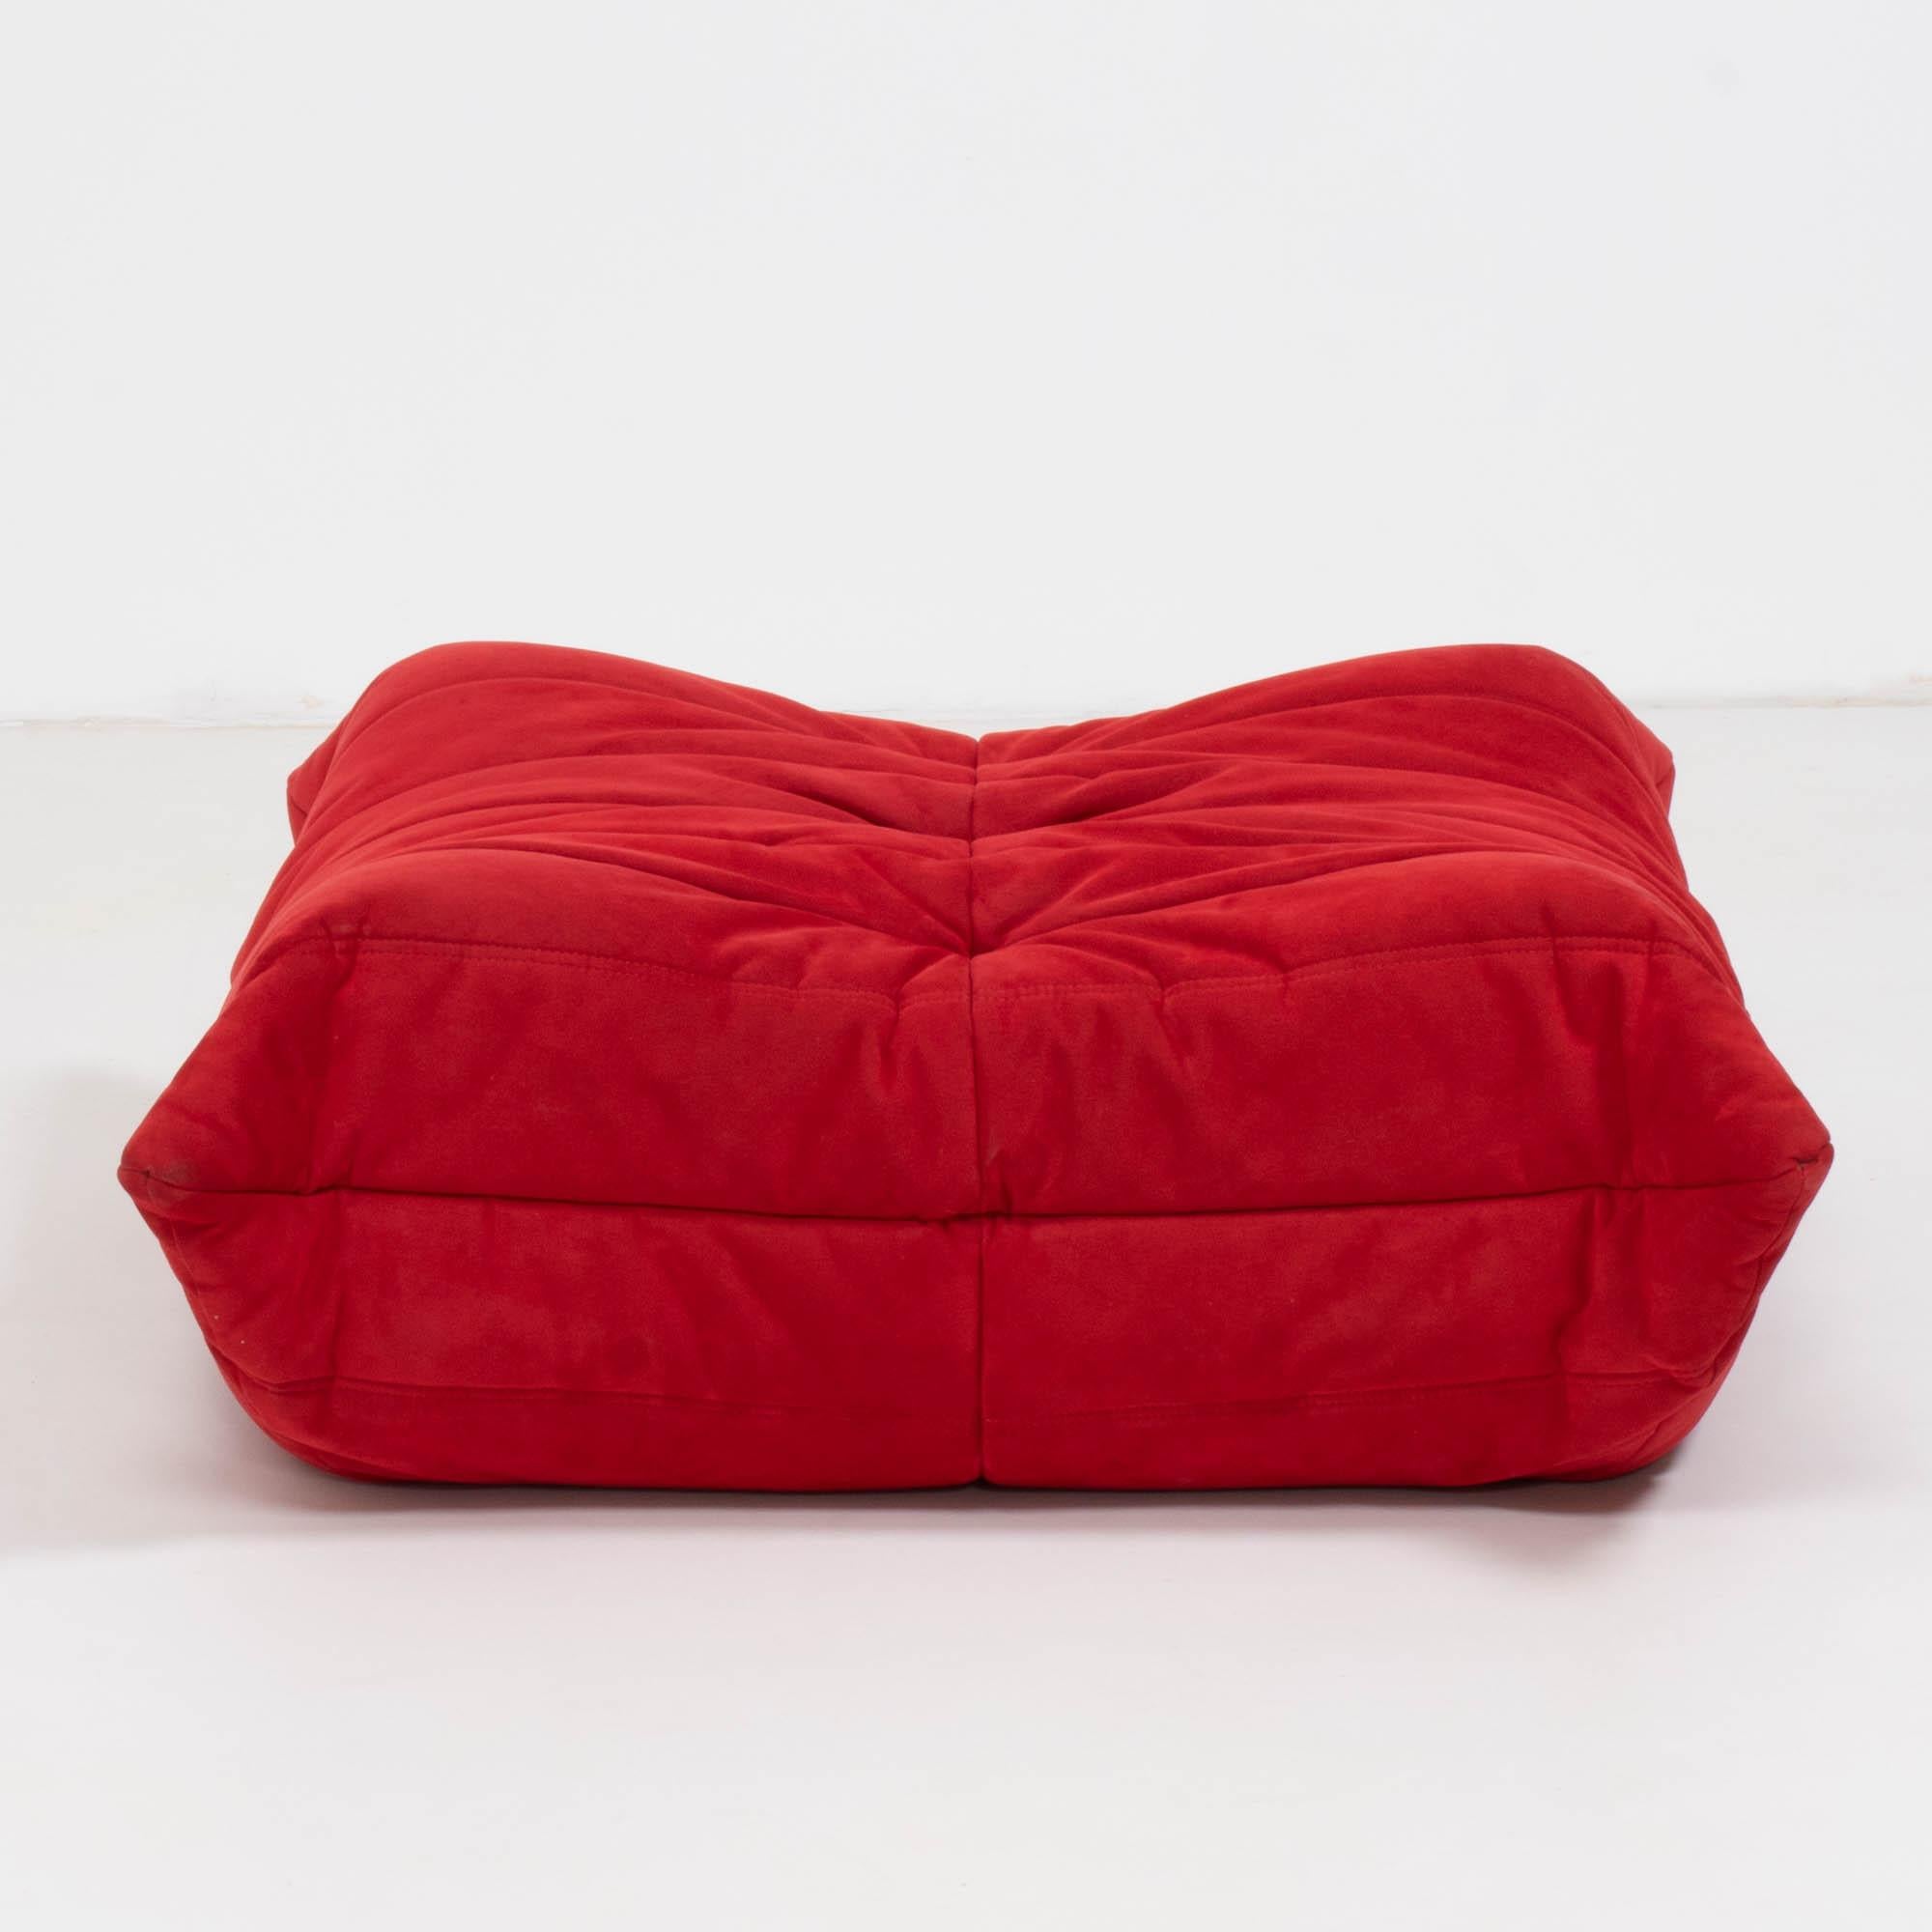 Ligne Roset by Michel Ducaroy Togo Red Modular Sofas and Footstool, Set of 3 1